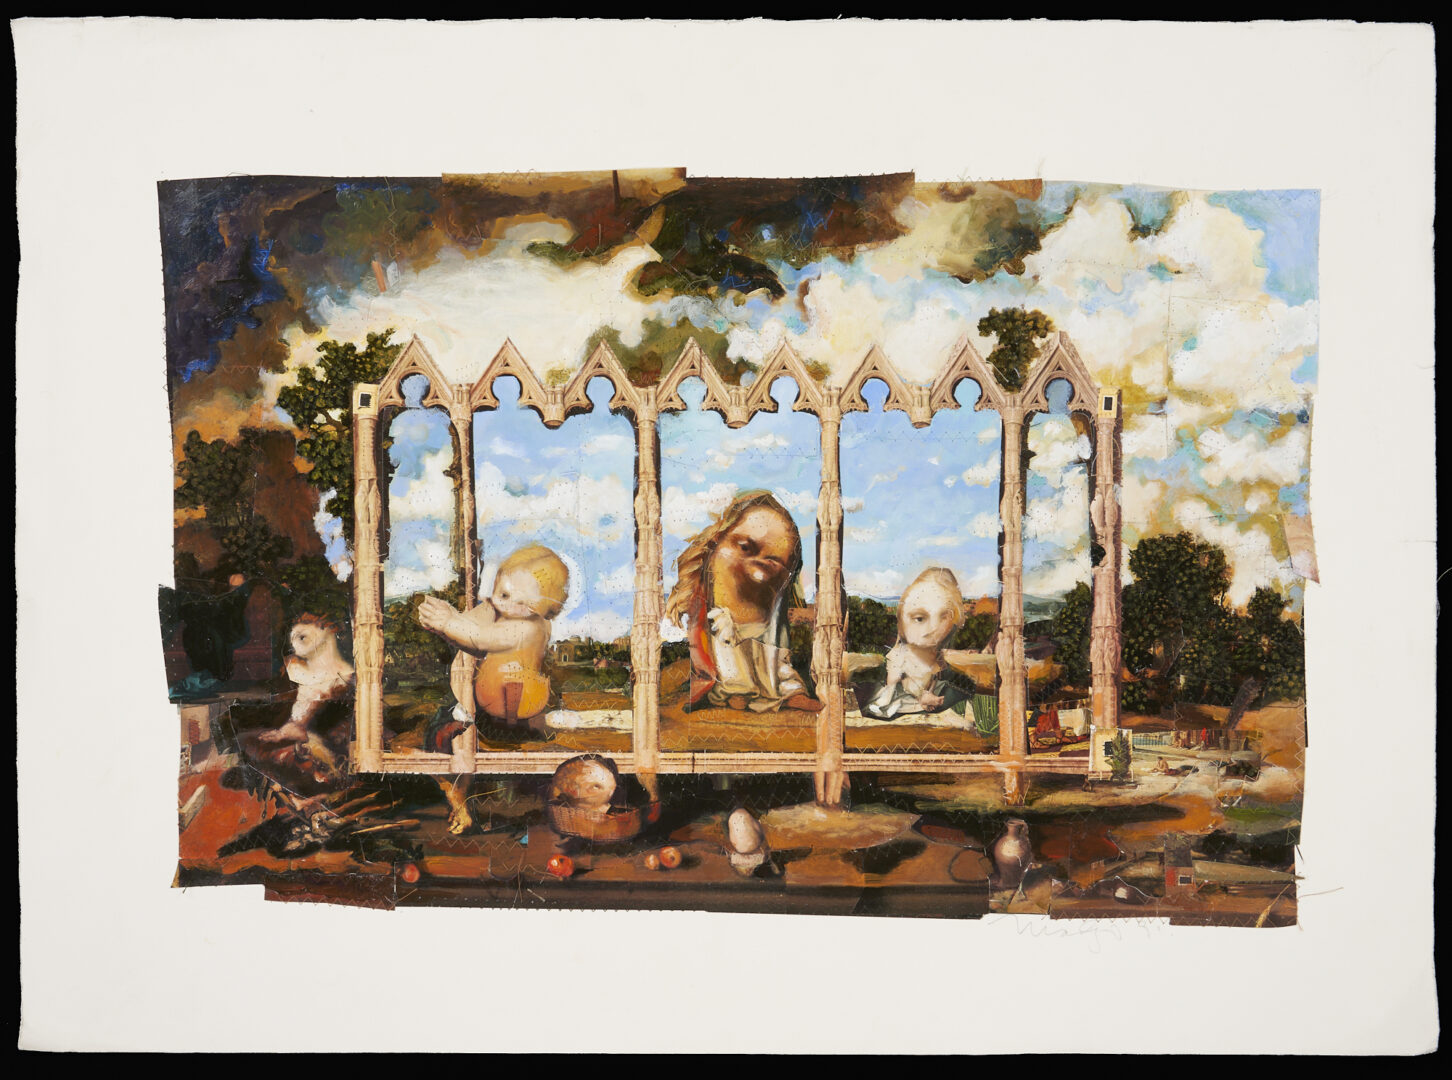 Lot 462: Michael Madzo Collage, "Of Men that Perish into Kingdoms of Tranquility"